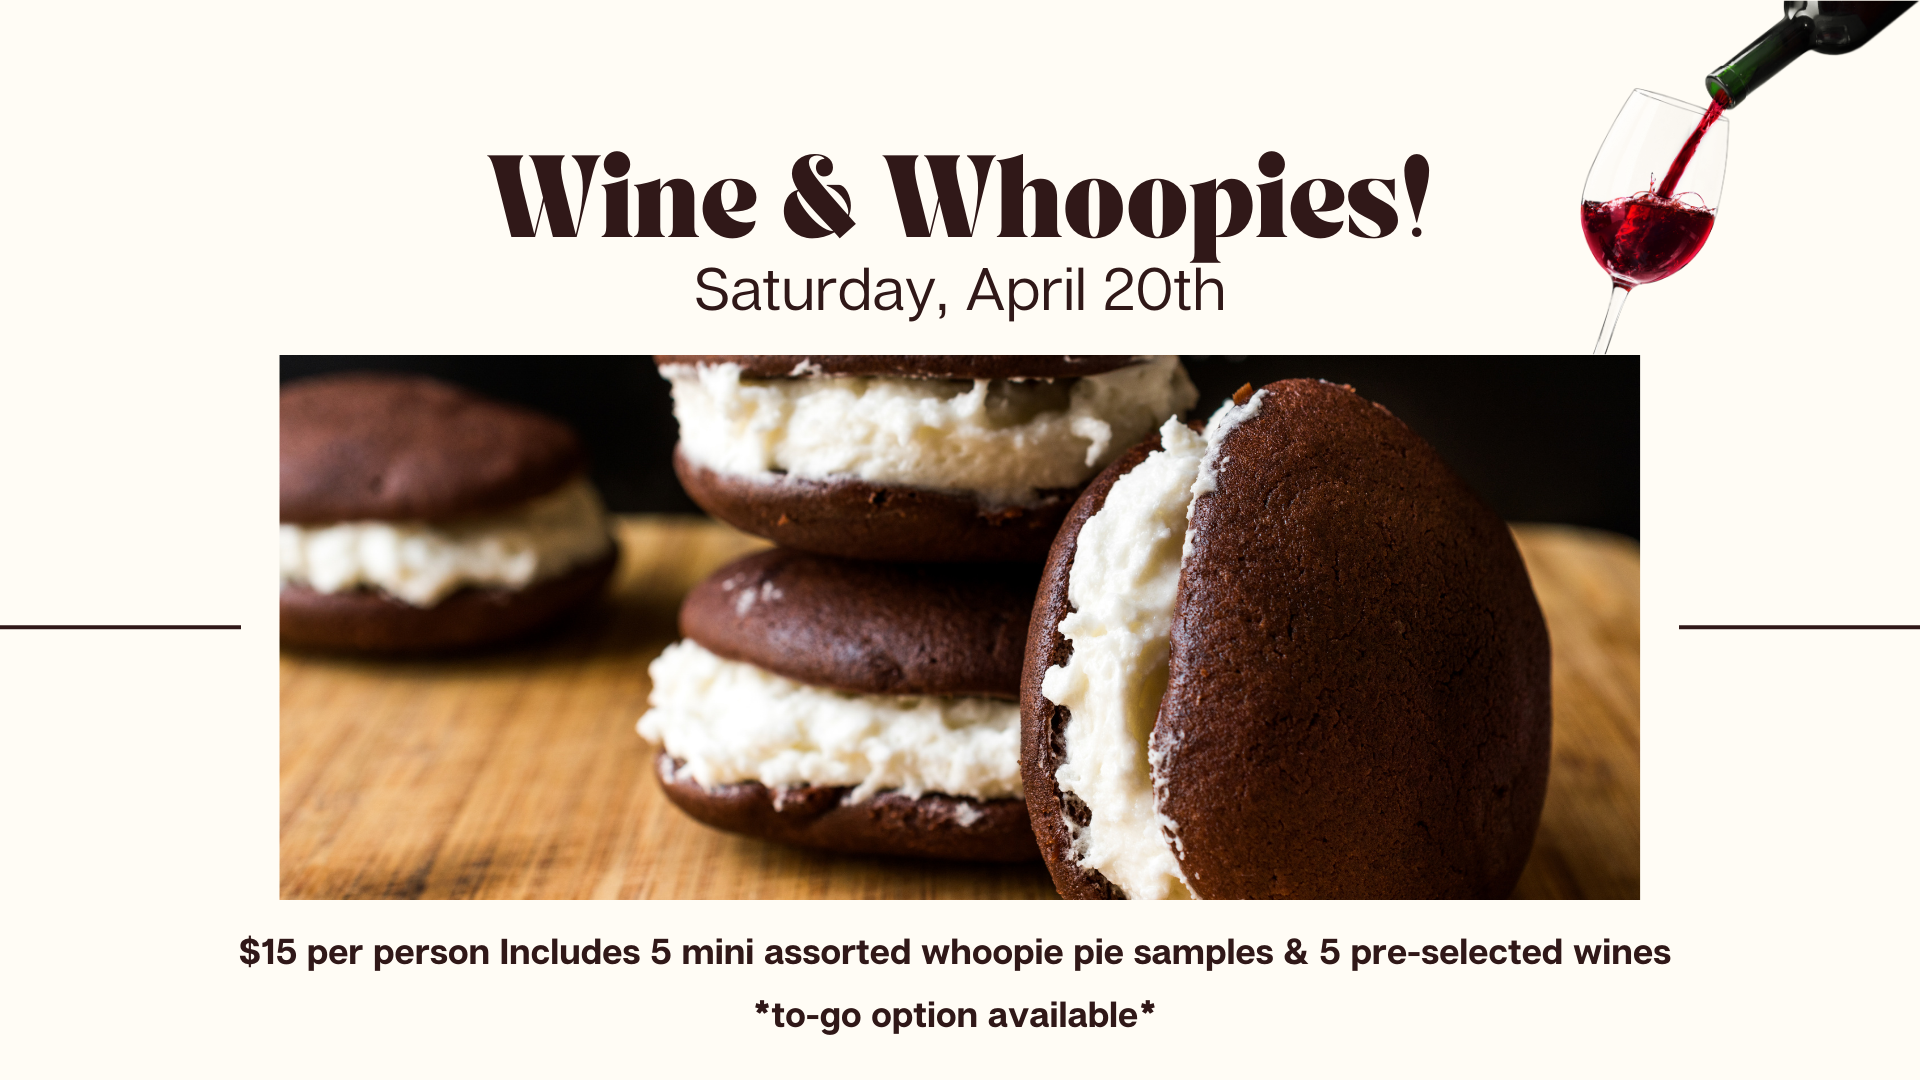 Wine & Whoopies! SOLD OUT! Call store for purchase